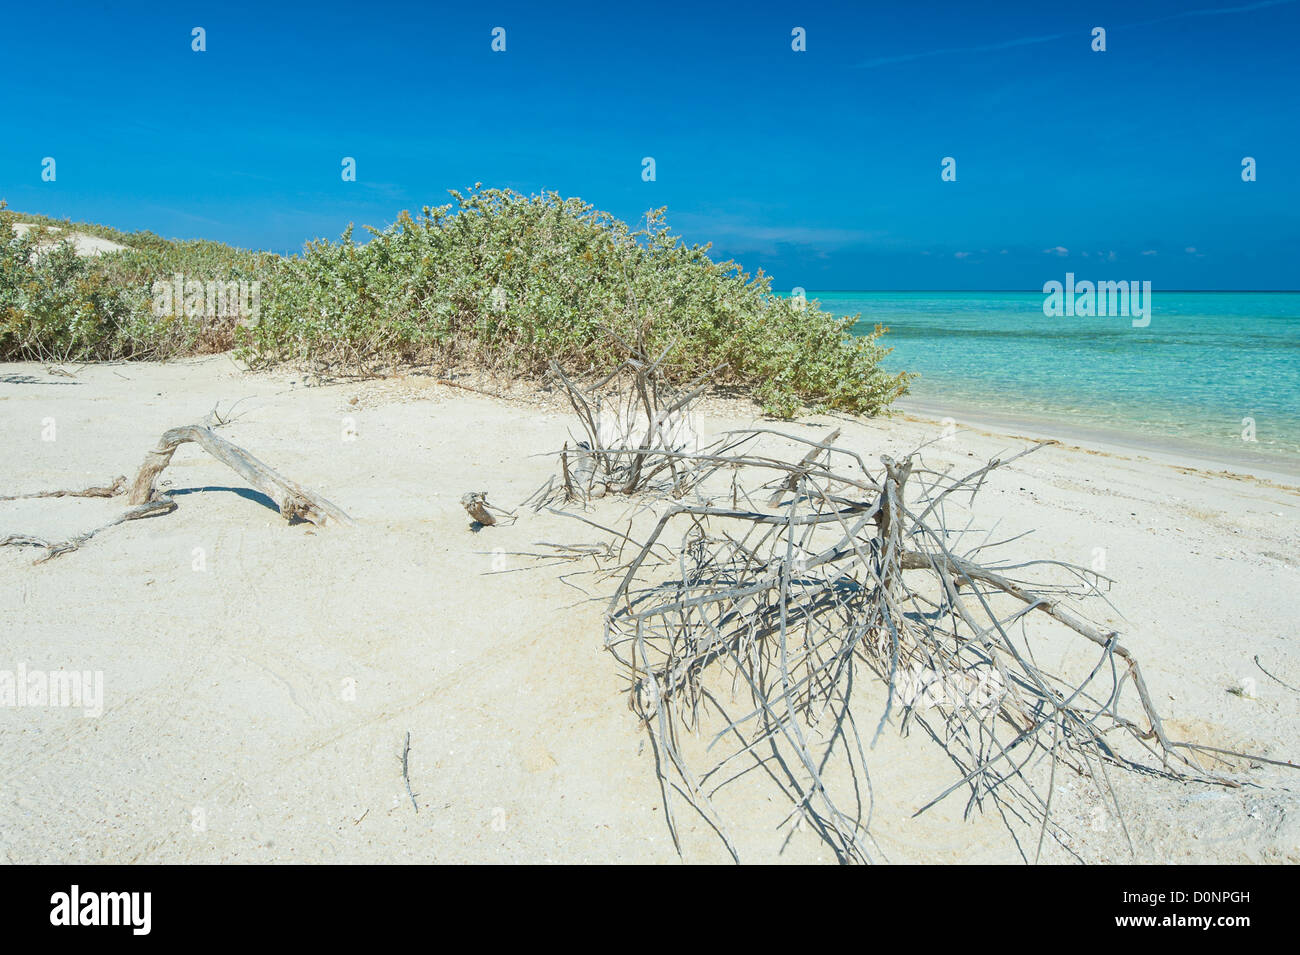 View from a beautiful tropical beach on a remote desert island with bushes Stock Photo